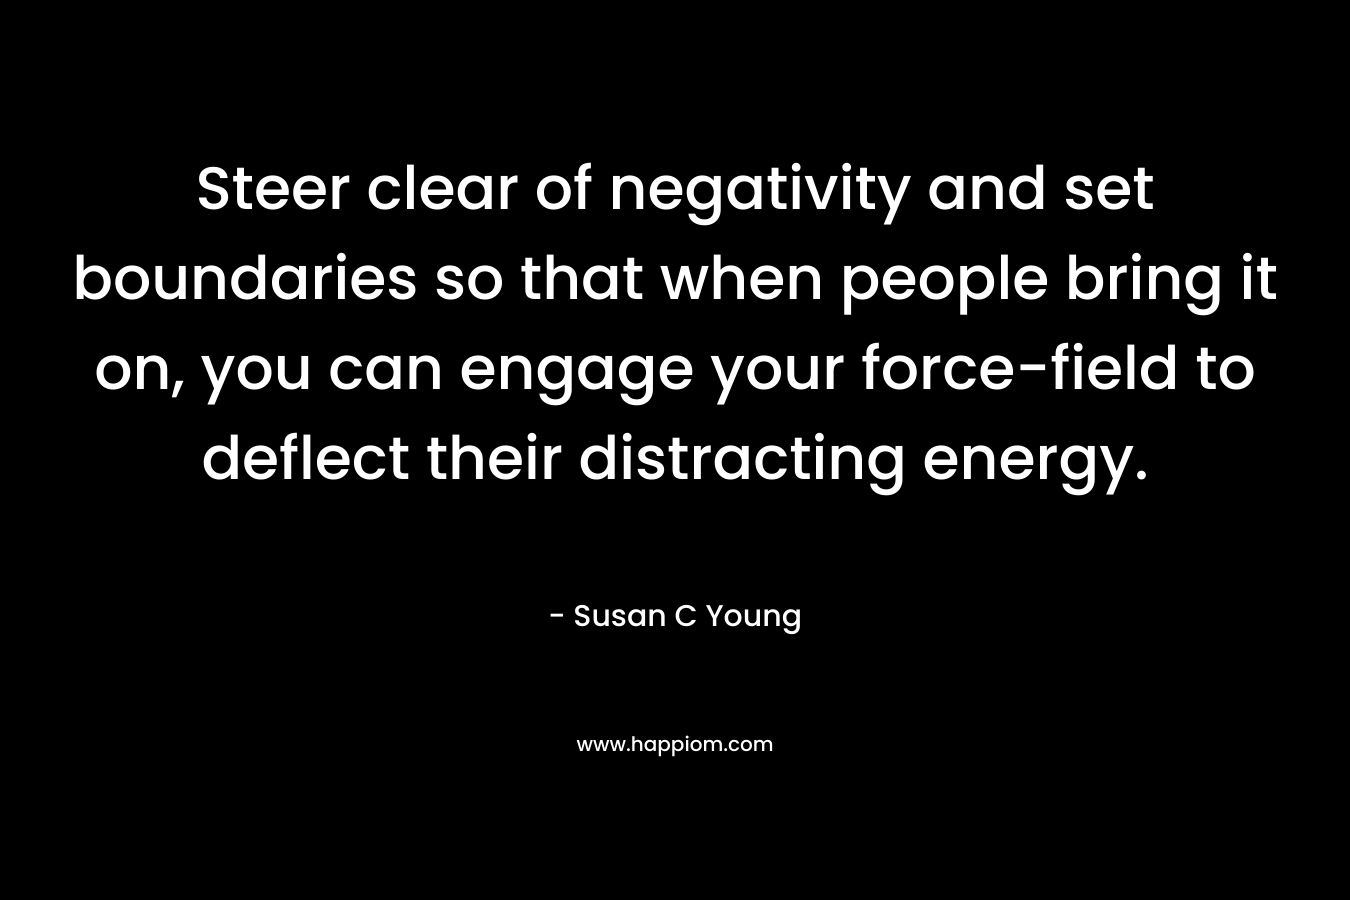 Steer clear of negativity and set boundaries so that when people bring it on, you can engage your force-field to deflect their distracting energy. – Susan C Young